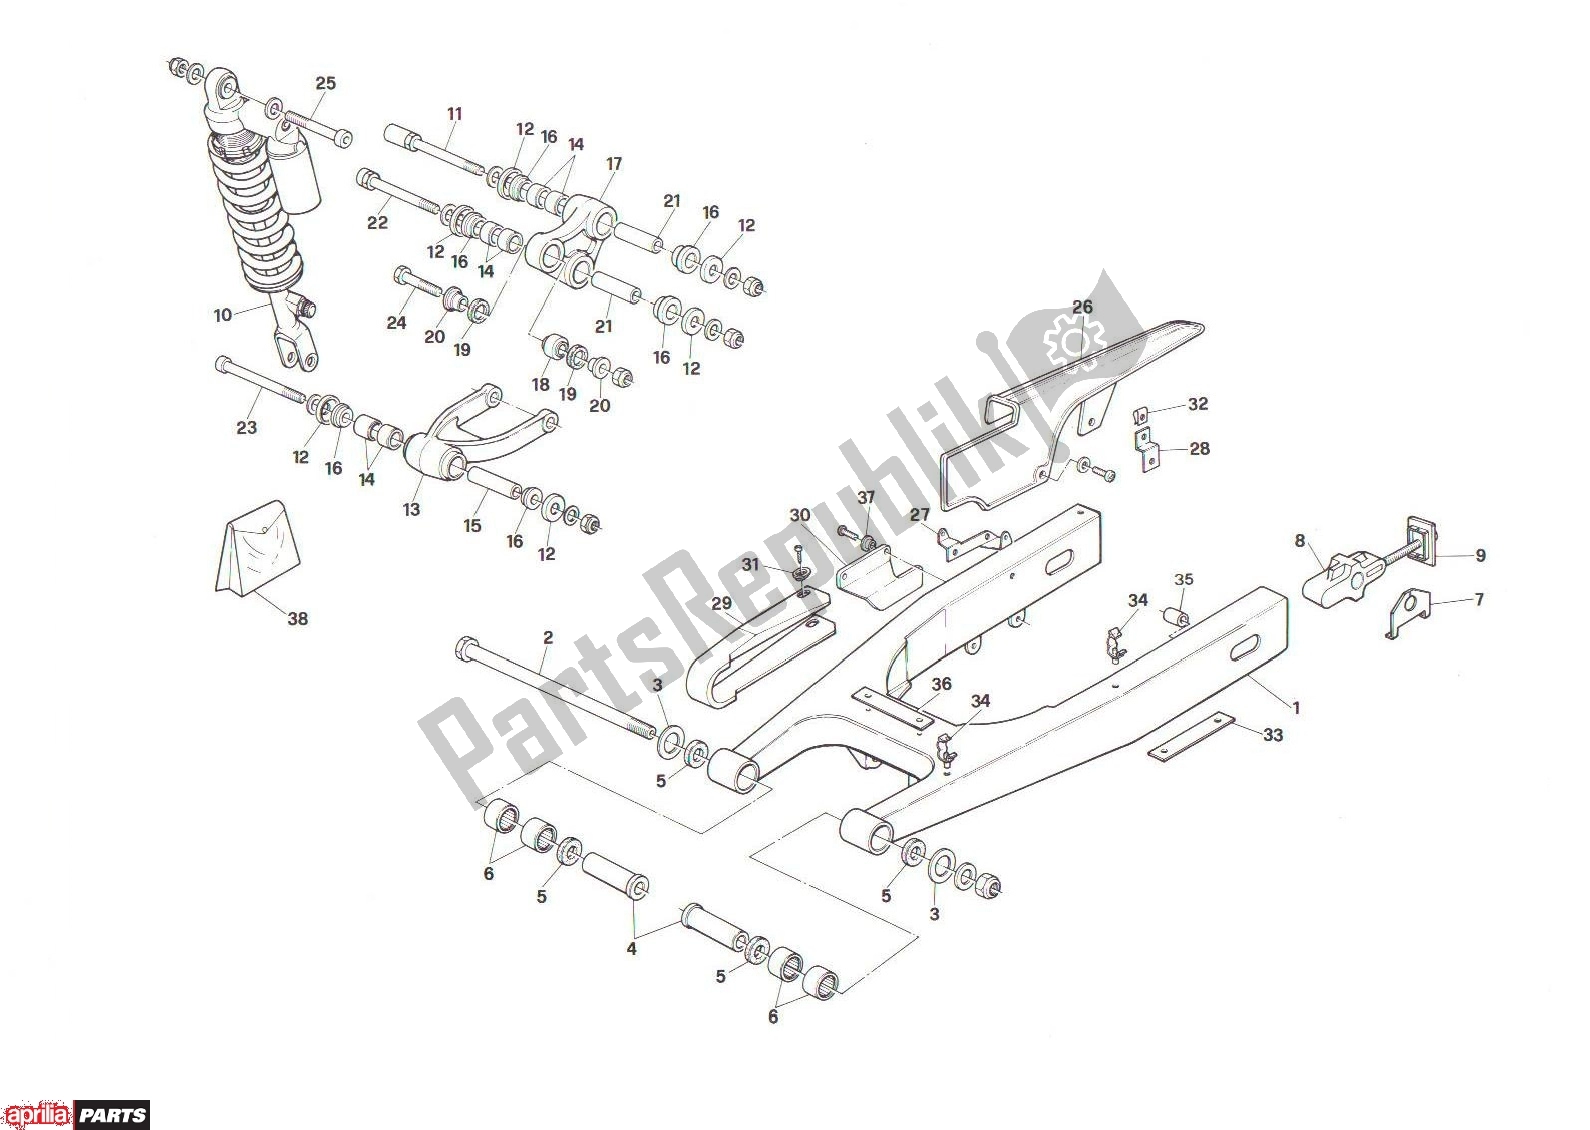 All parts for the Rear Swing of the Aprilia RX 101 125 1989